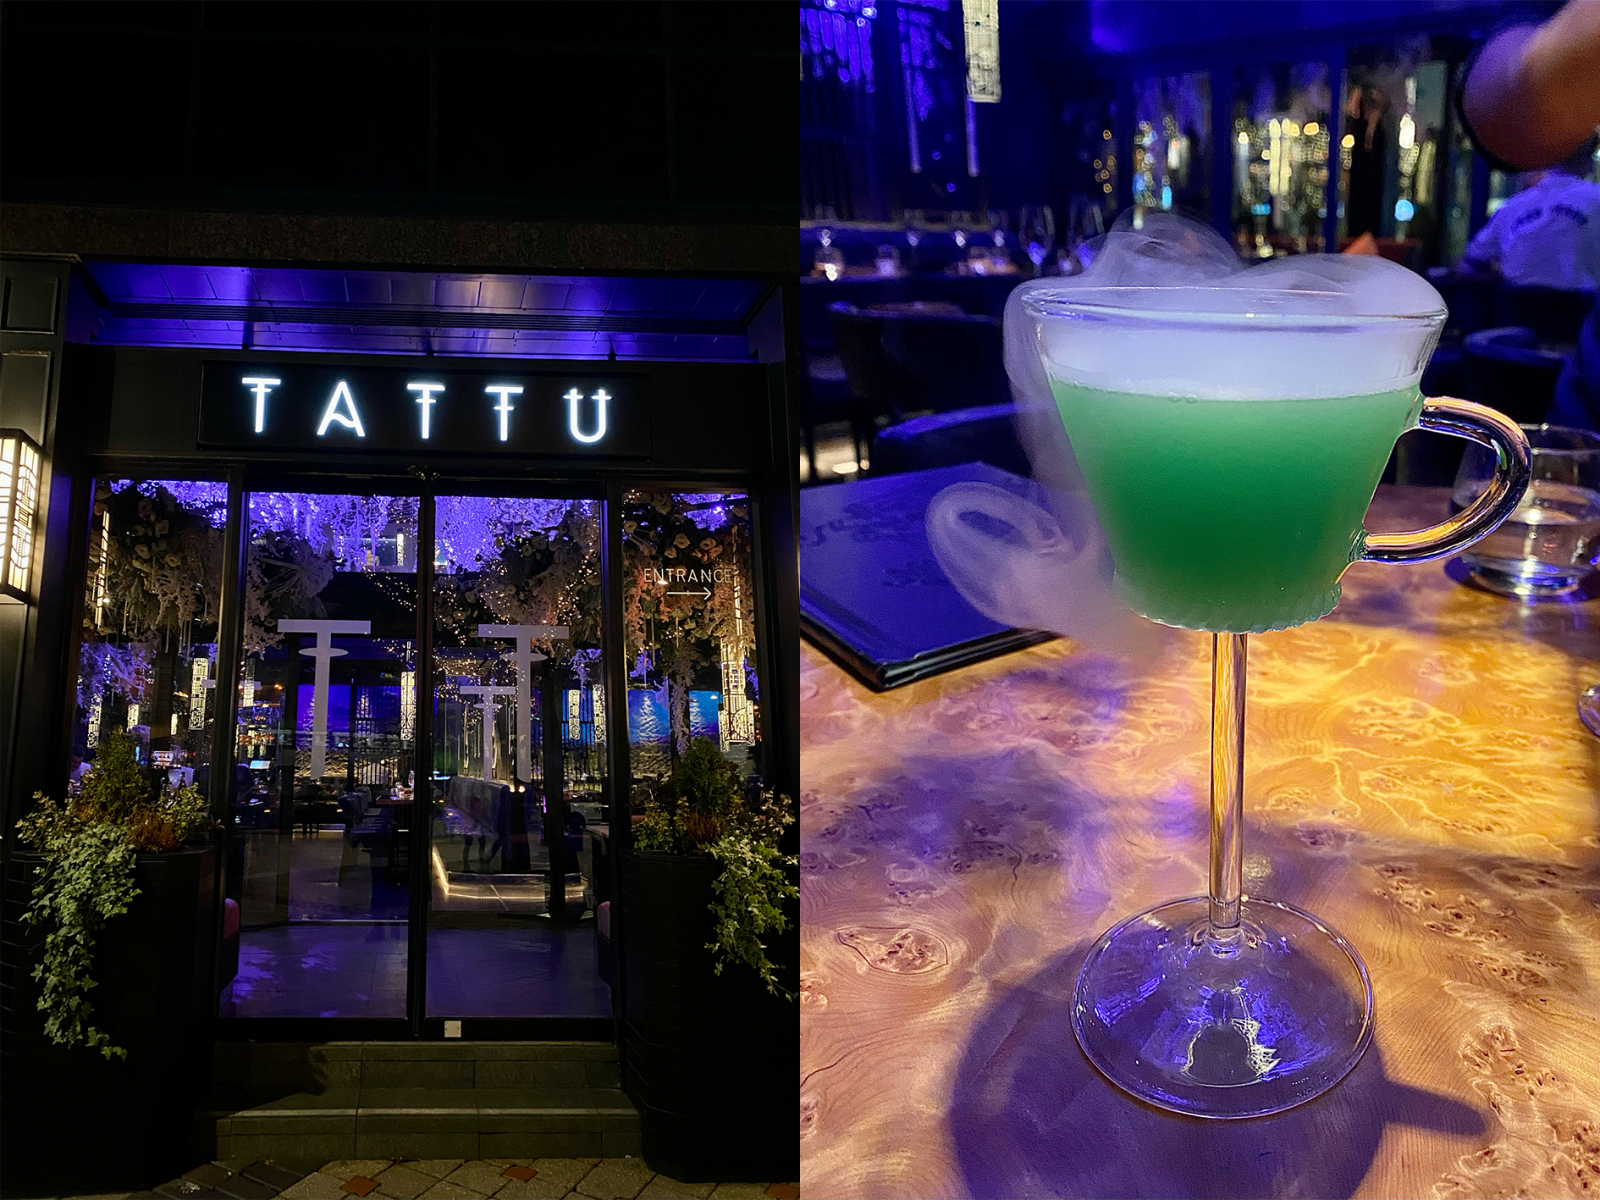 The entrance to Tattu and their new cocktail.